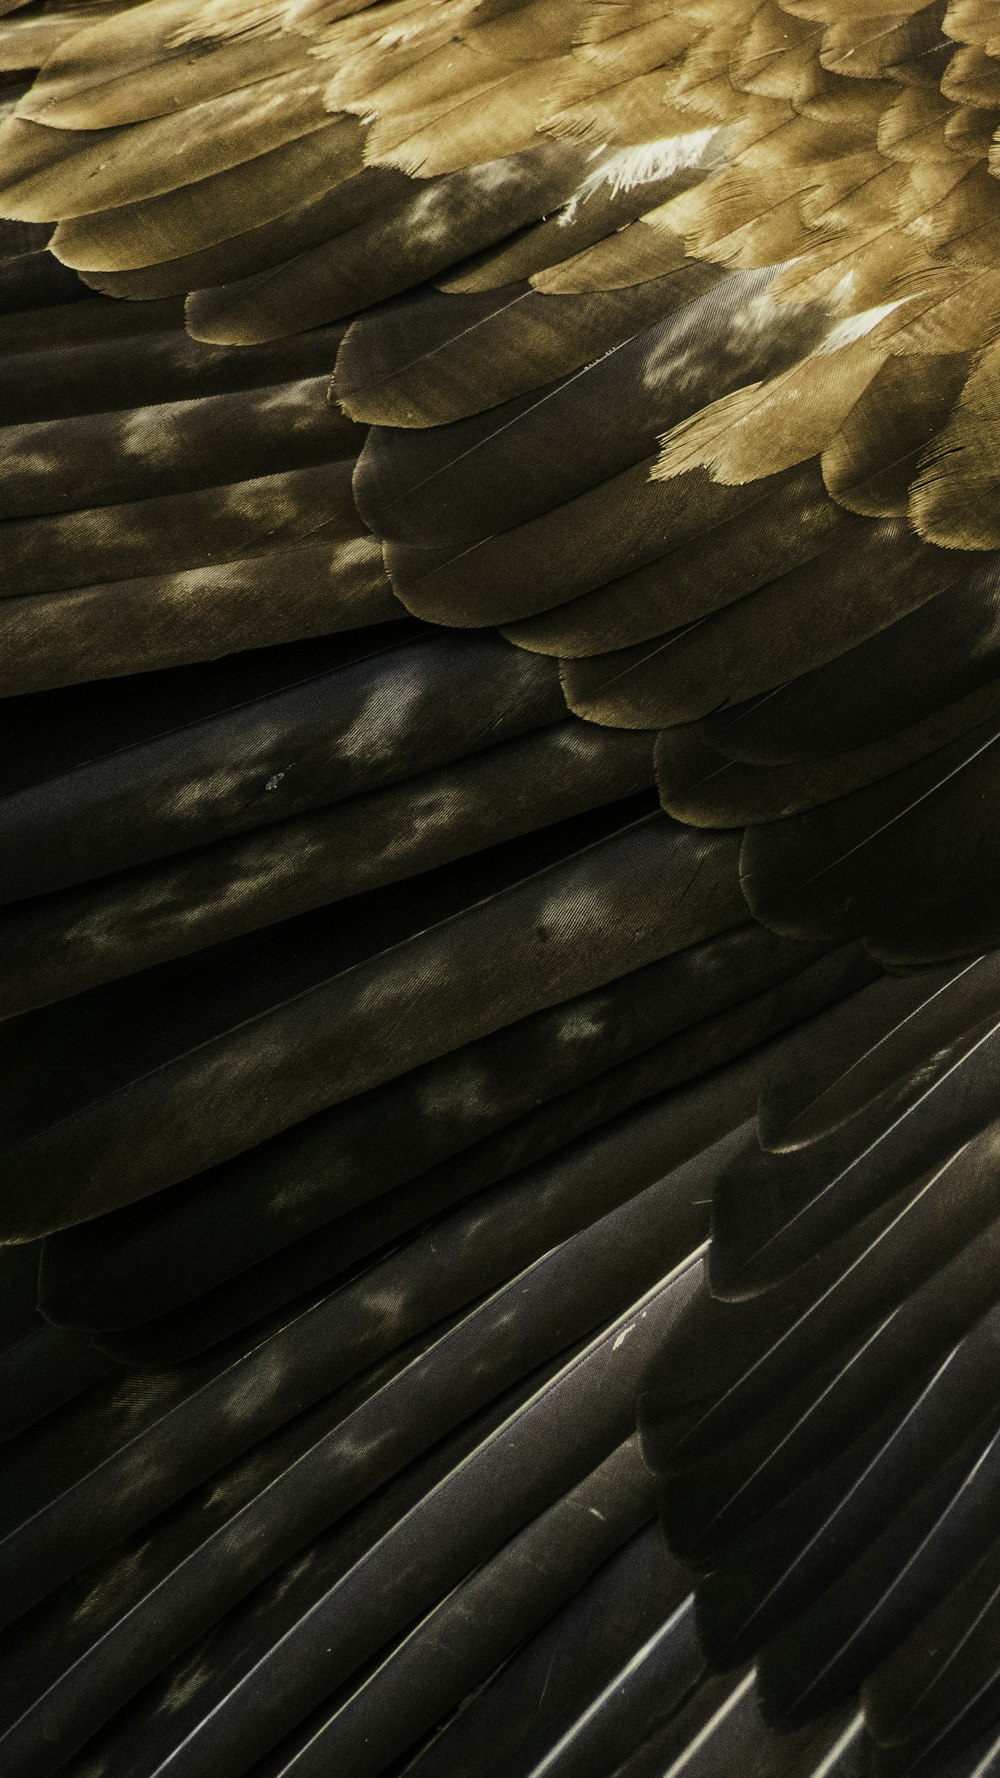 brown bird wings in close up photography